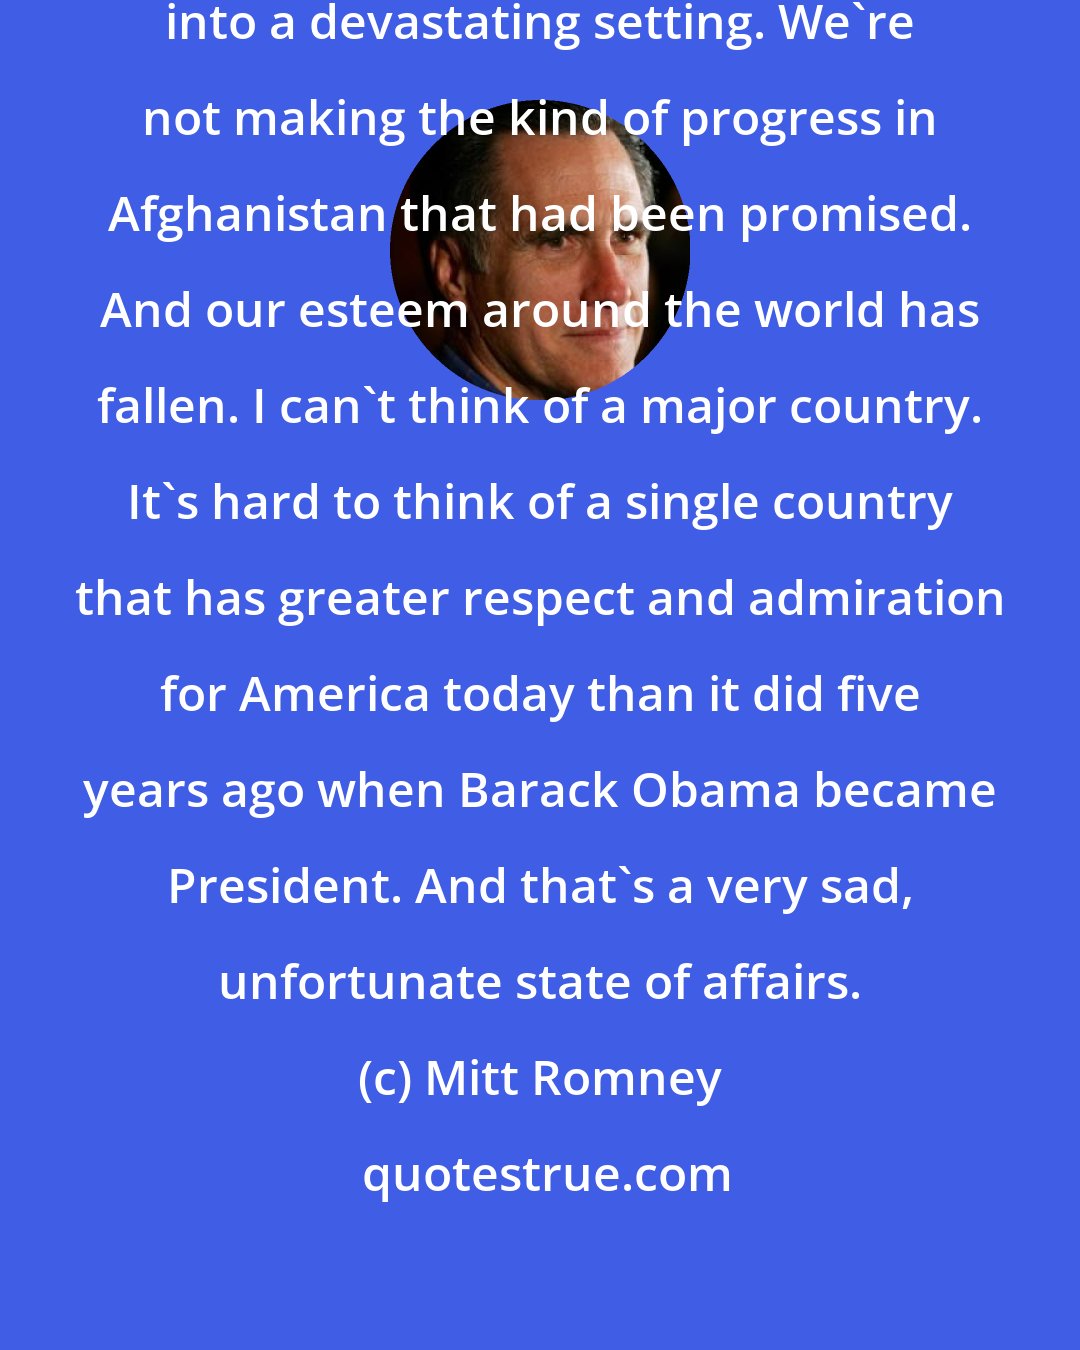 Mitt Romney: Iraq is fragile and may fall back into a devastating setting. We're not making the kind of progress in Afghanistan that had been promised. And our esteem around the world has fallen. I can't think of a major country. It's hard to think of a single country that has greater respect and admiration for America today than it did five years ago when Barack Obama became President. And that's a very sad, unfortunate state of affairs.